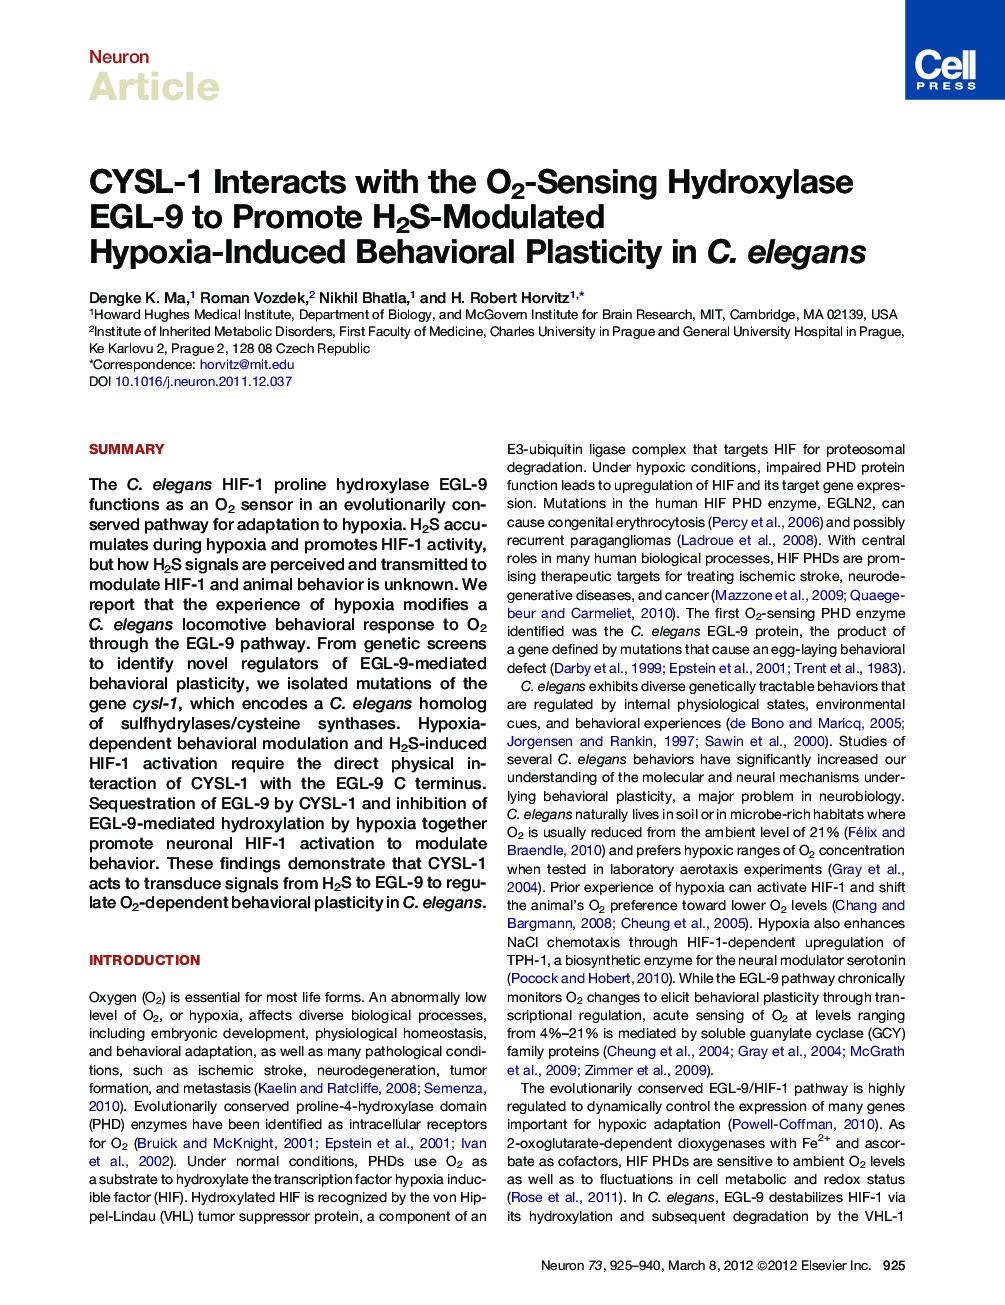 CYSL-1 Interacts with the O2-Sensing Hydroxylase EGL-9 to Promote H2S-Modulated Hypoxia-Induced Behavioral Plasticity in C. elegans